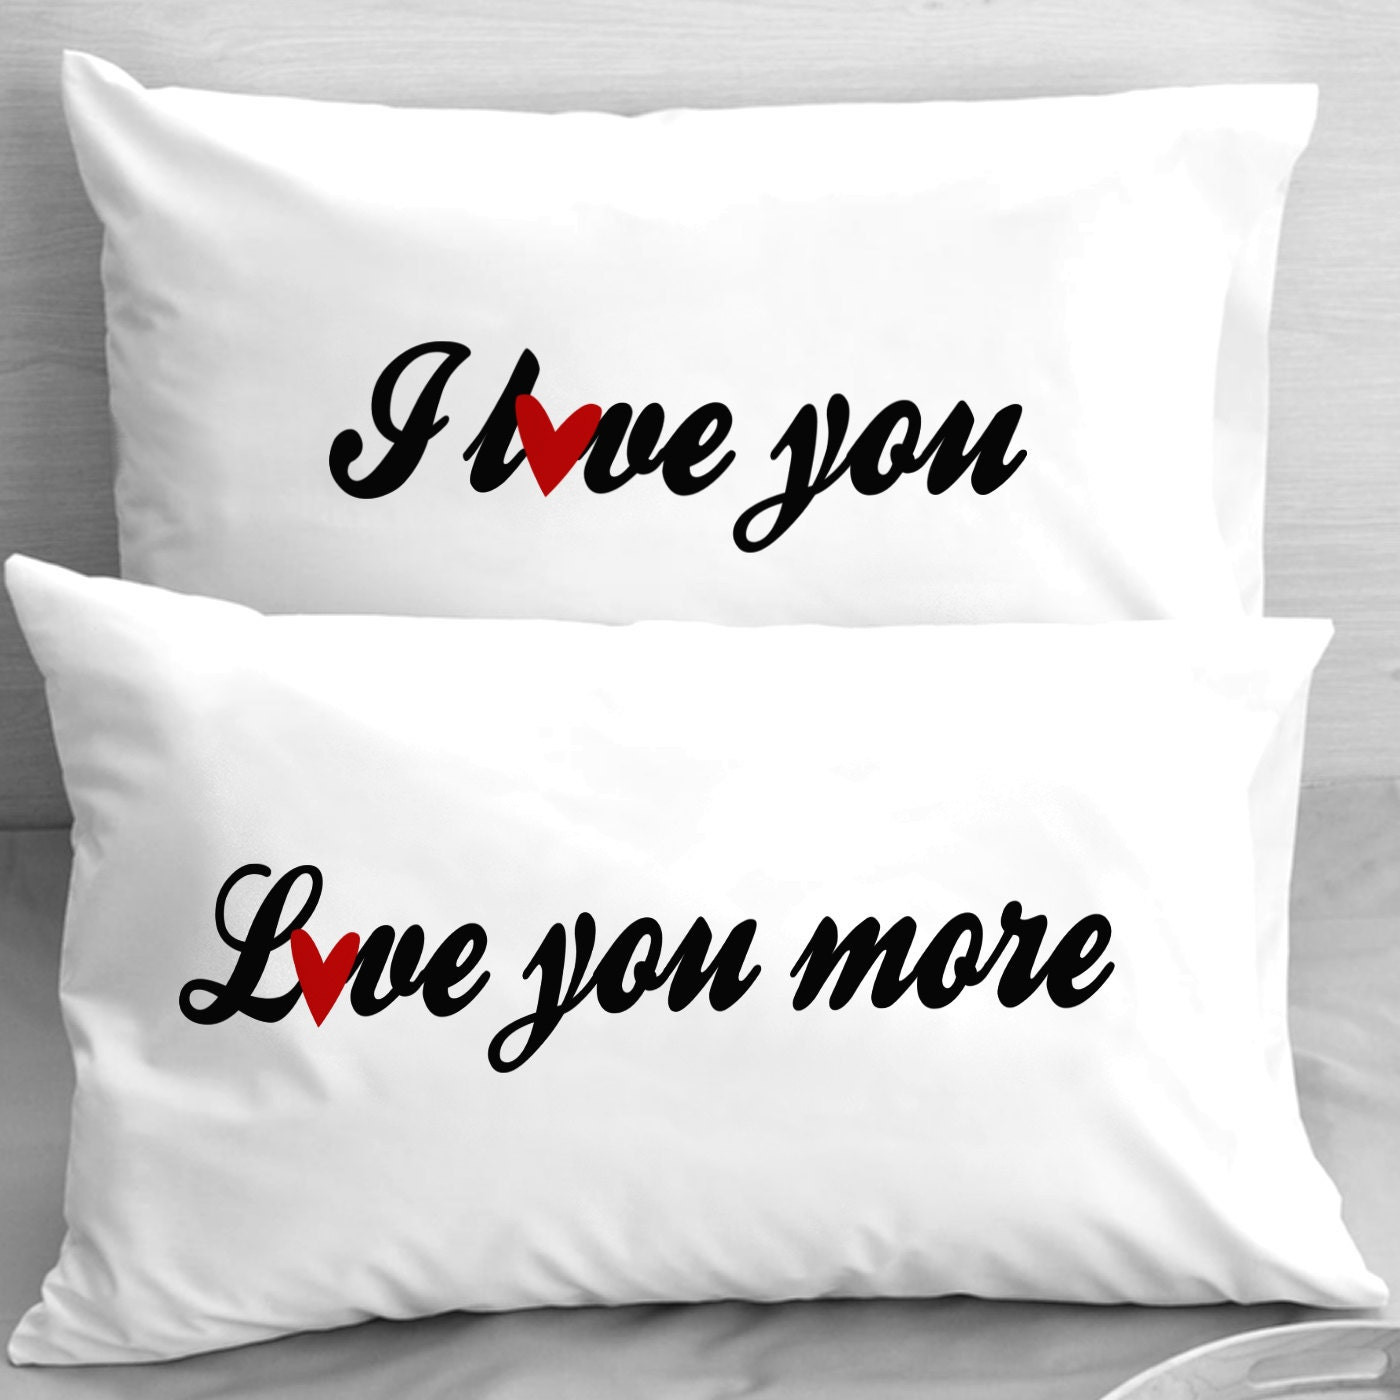 I Love You Gift Ideas For Girlfriend
 I Love You Love you More Pillow Cases Love Note For Him